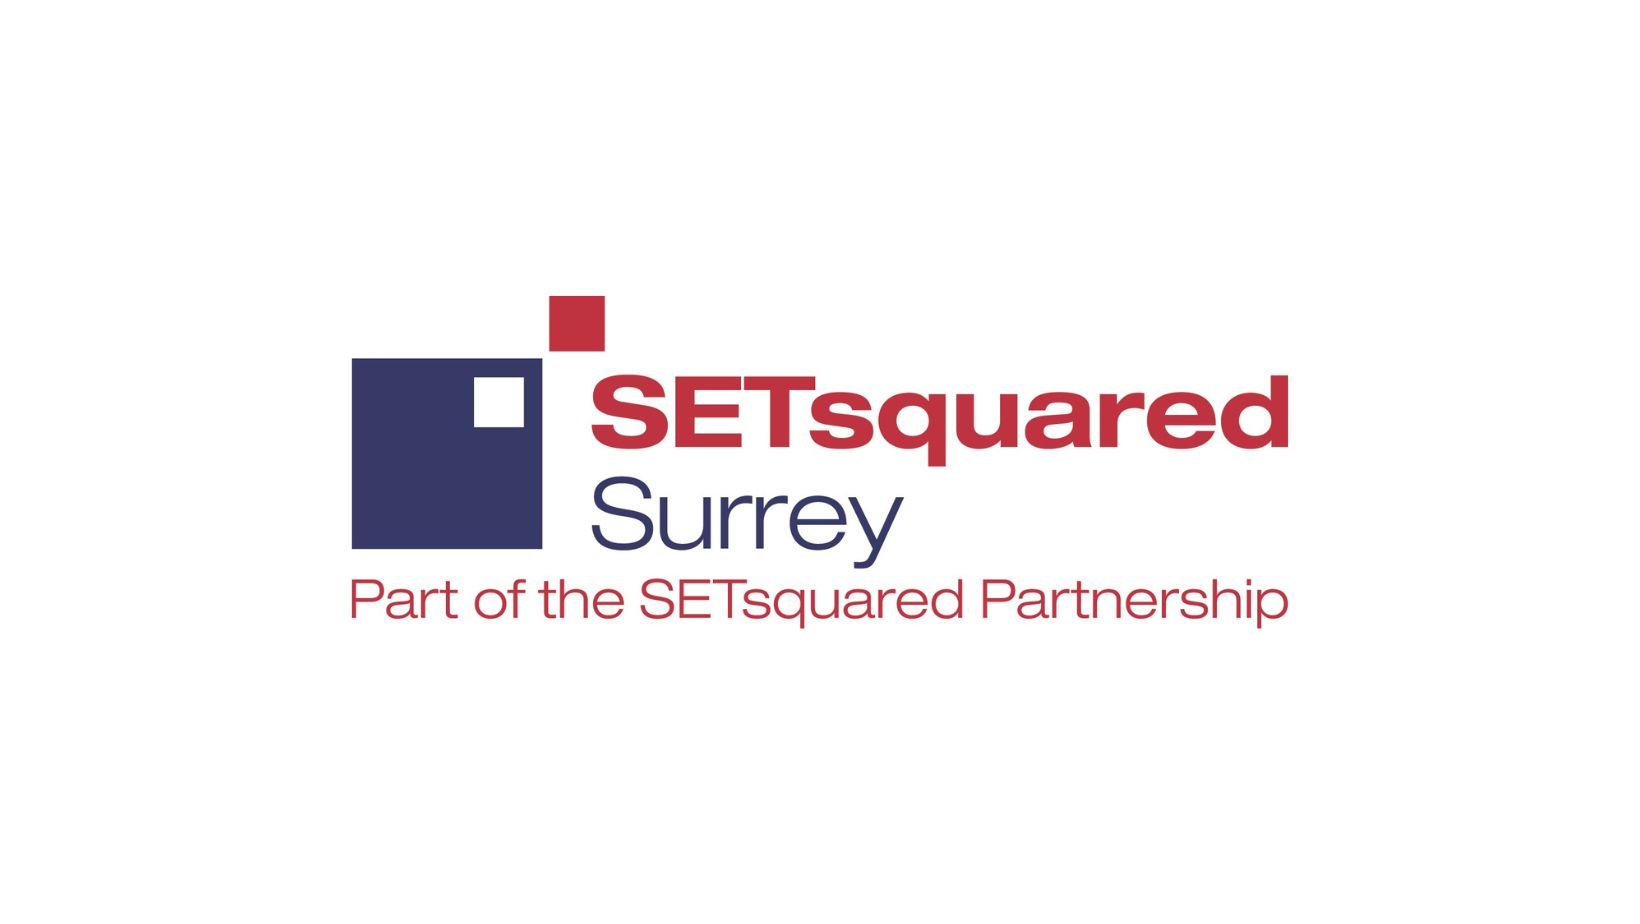 About SETsquared Surrey